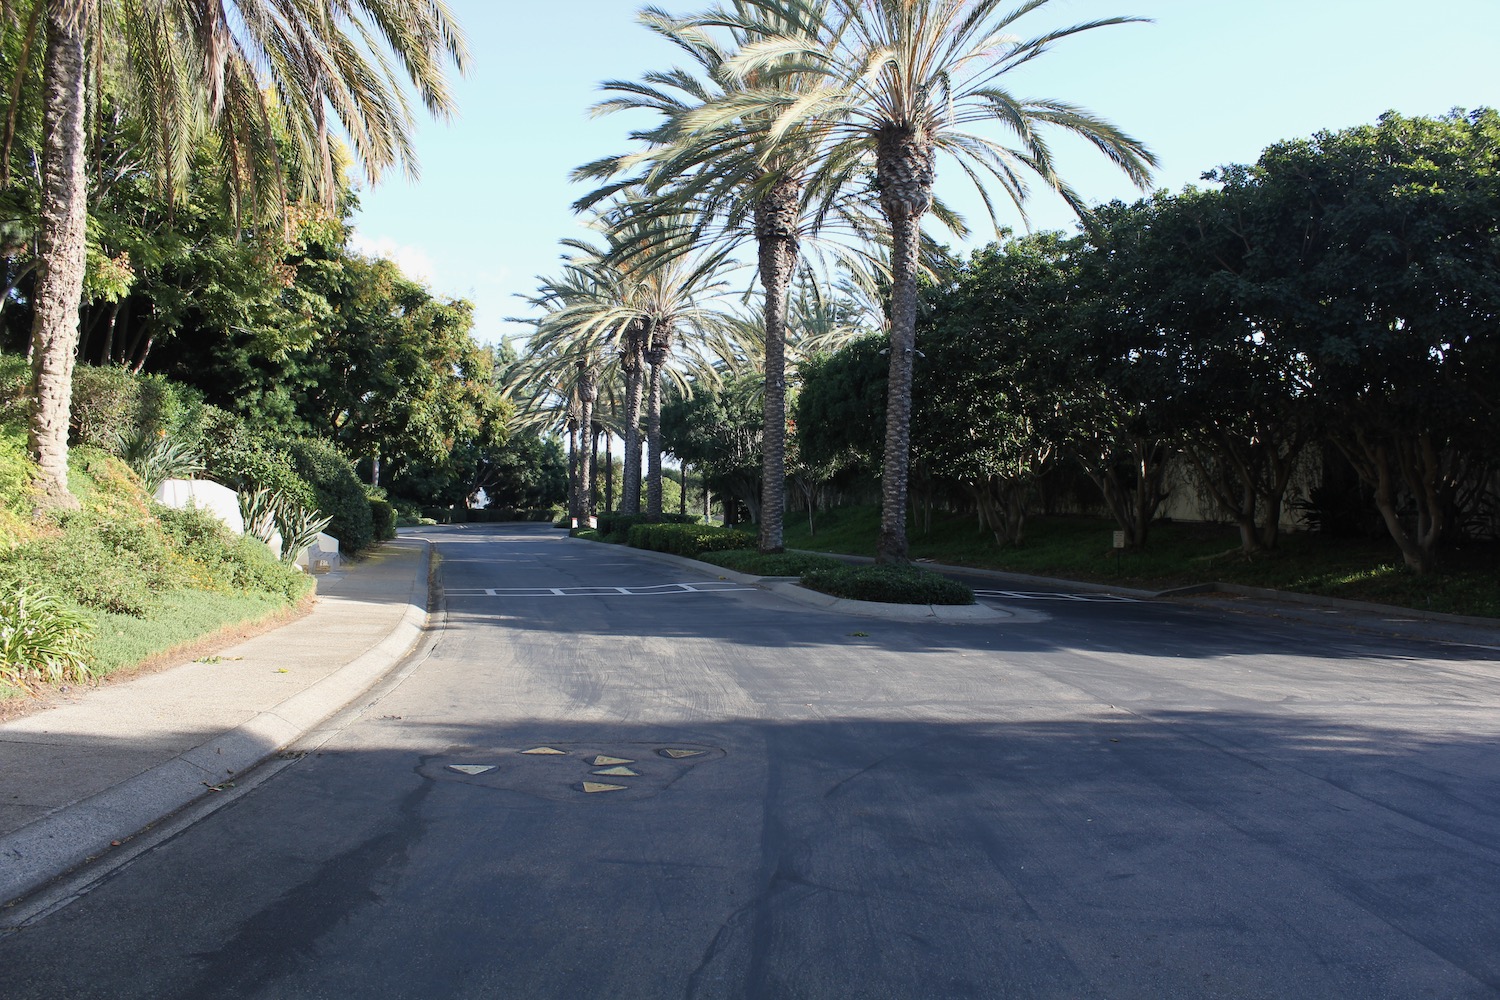 a street with palm trees and a row of palm trees